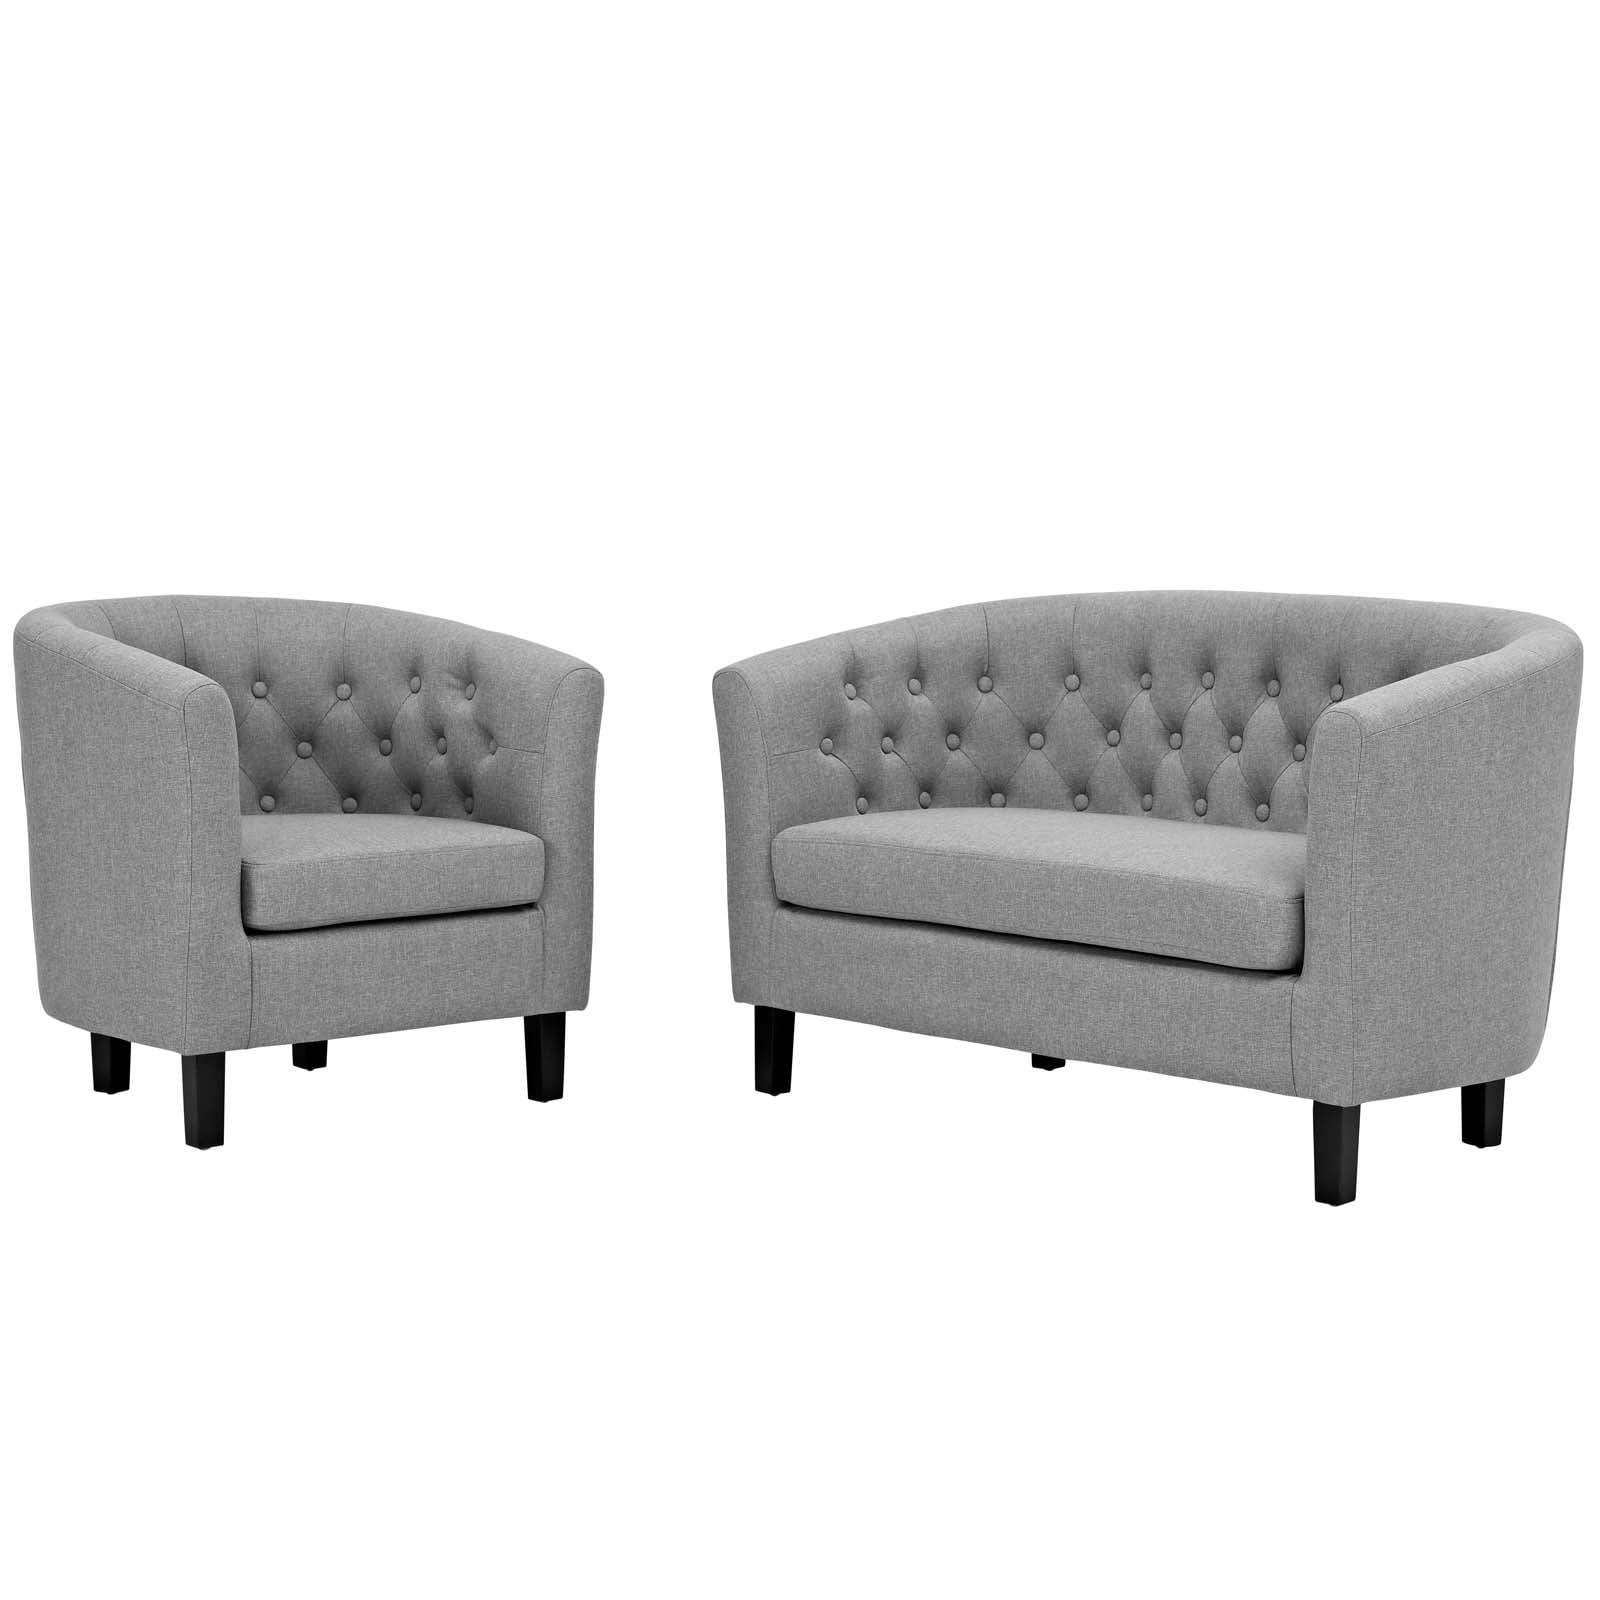 Prospect 2-Piece Light Gray Button Tufted Fabric Loveseat and Armchair Set